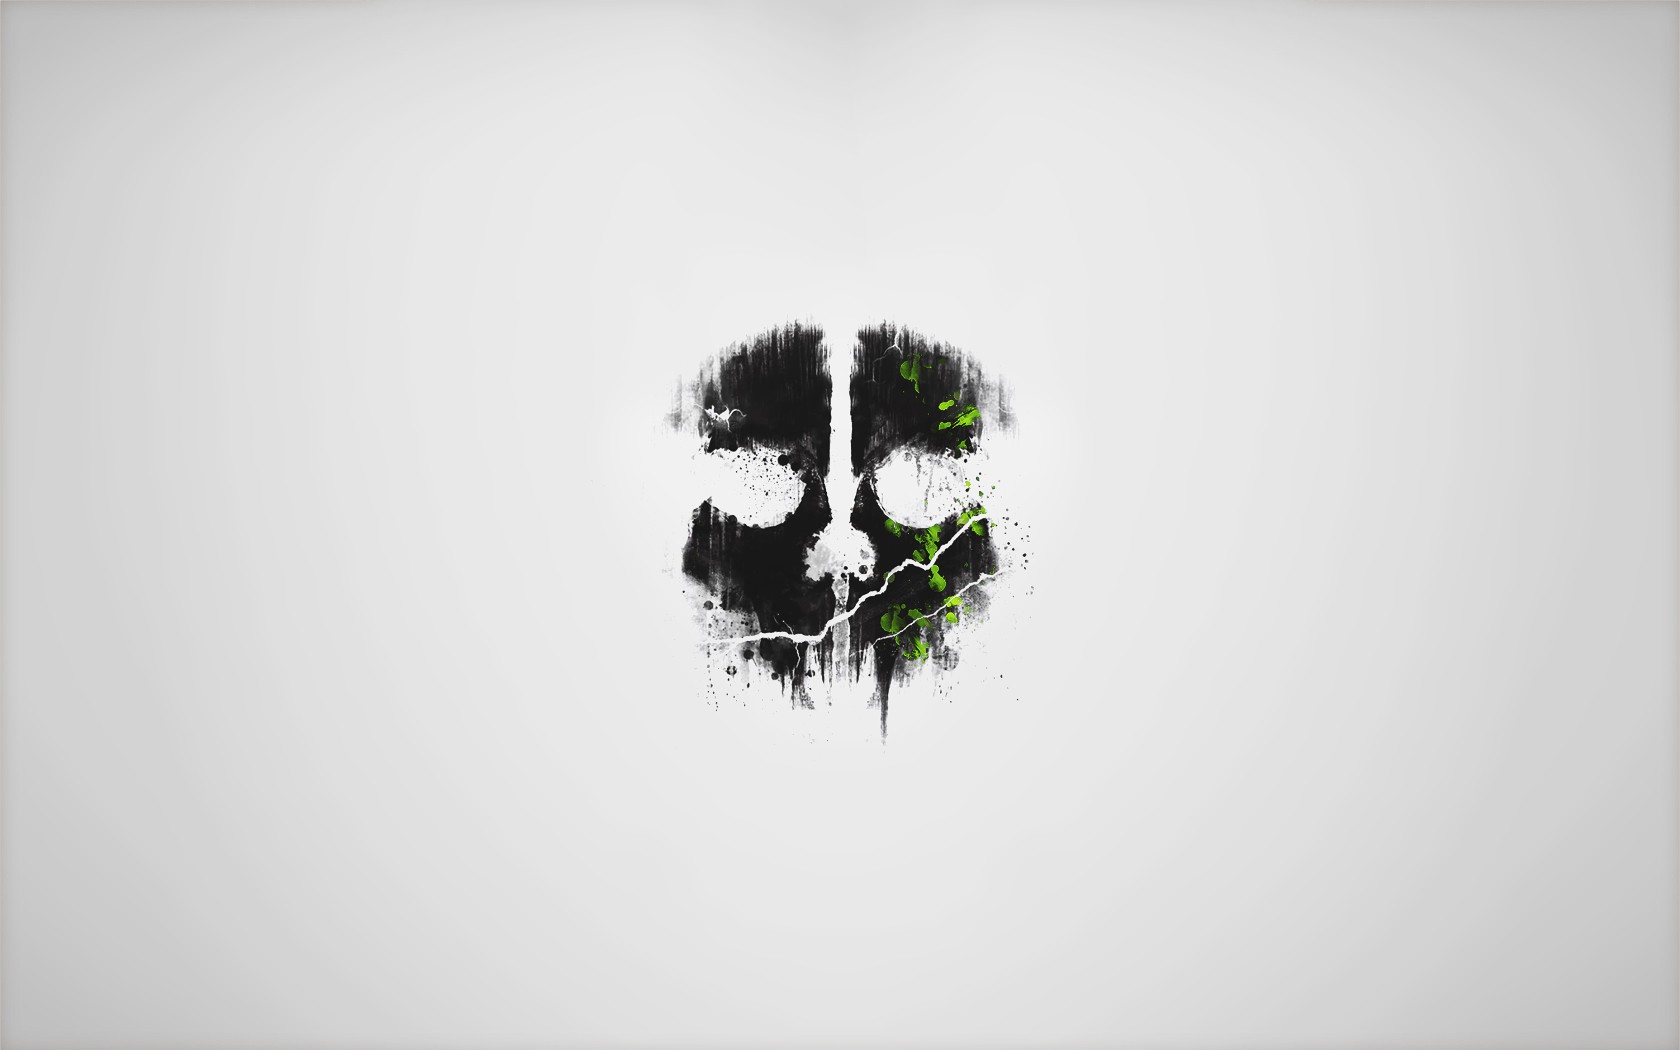 General 1680x1050 Call of Duty: Ghosts skull minimalism gray black green lights video games Call of Duty PC gaming video game art simple background white background